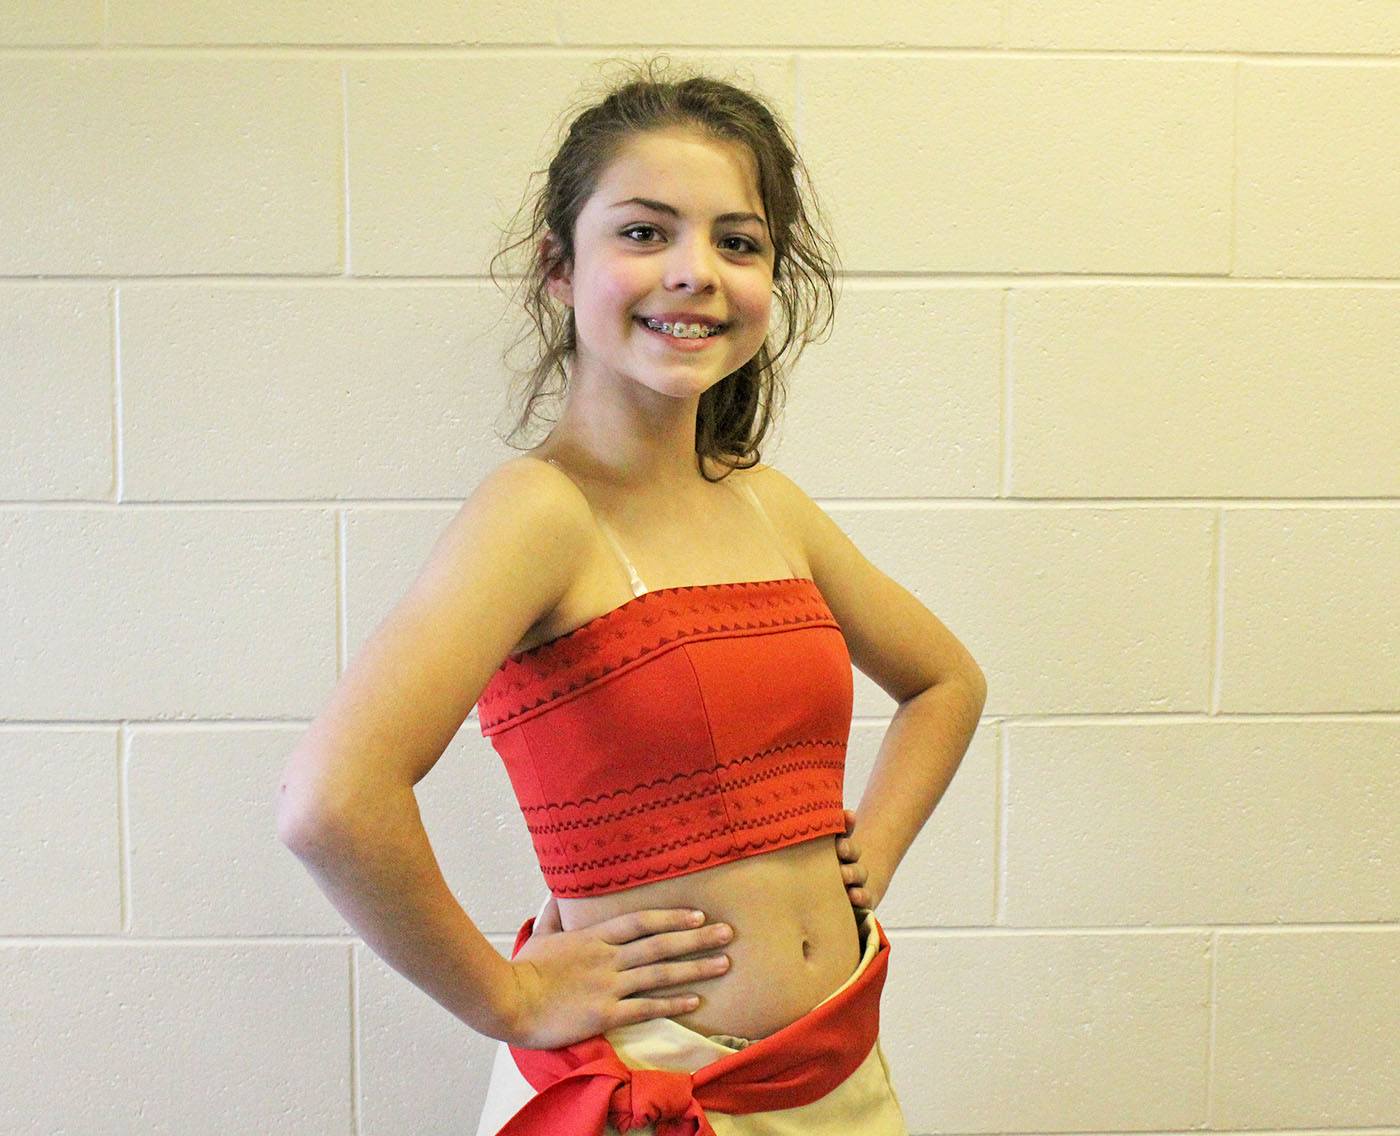 FIERCE AND COURAGEOUS - Jasmine Filiatrault is playing the role of Tiger Lily in Cornerstone Youth Theatre’s performance of Peter Pan